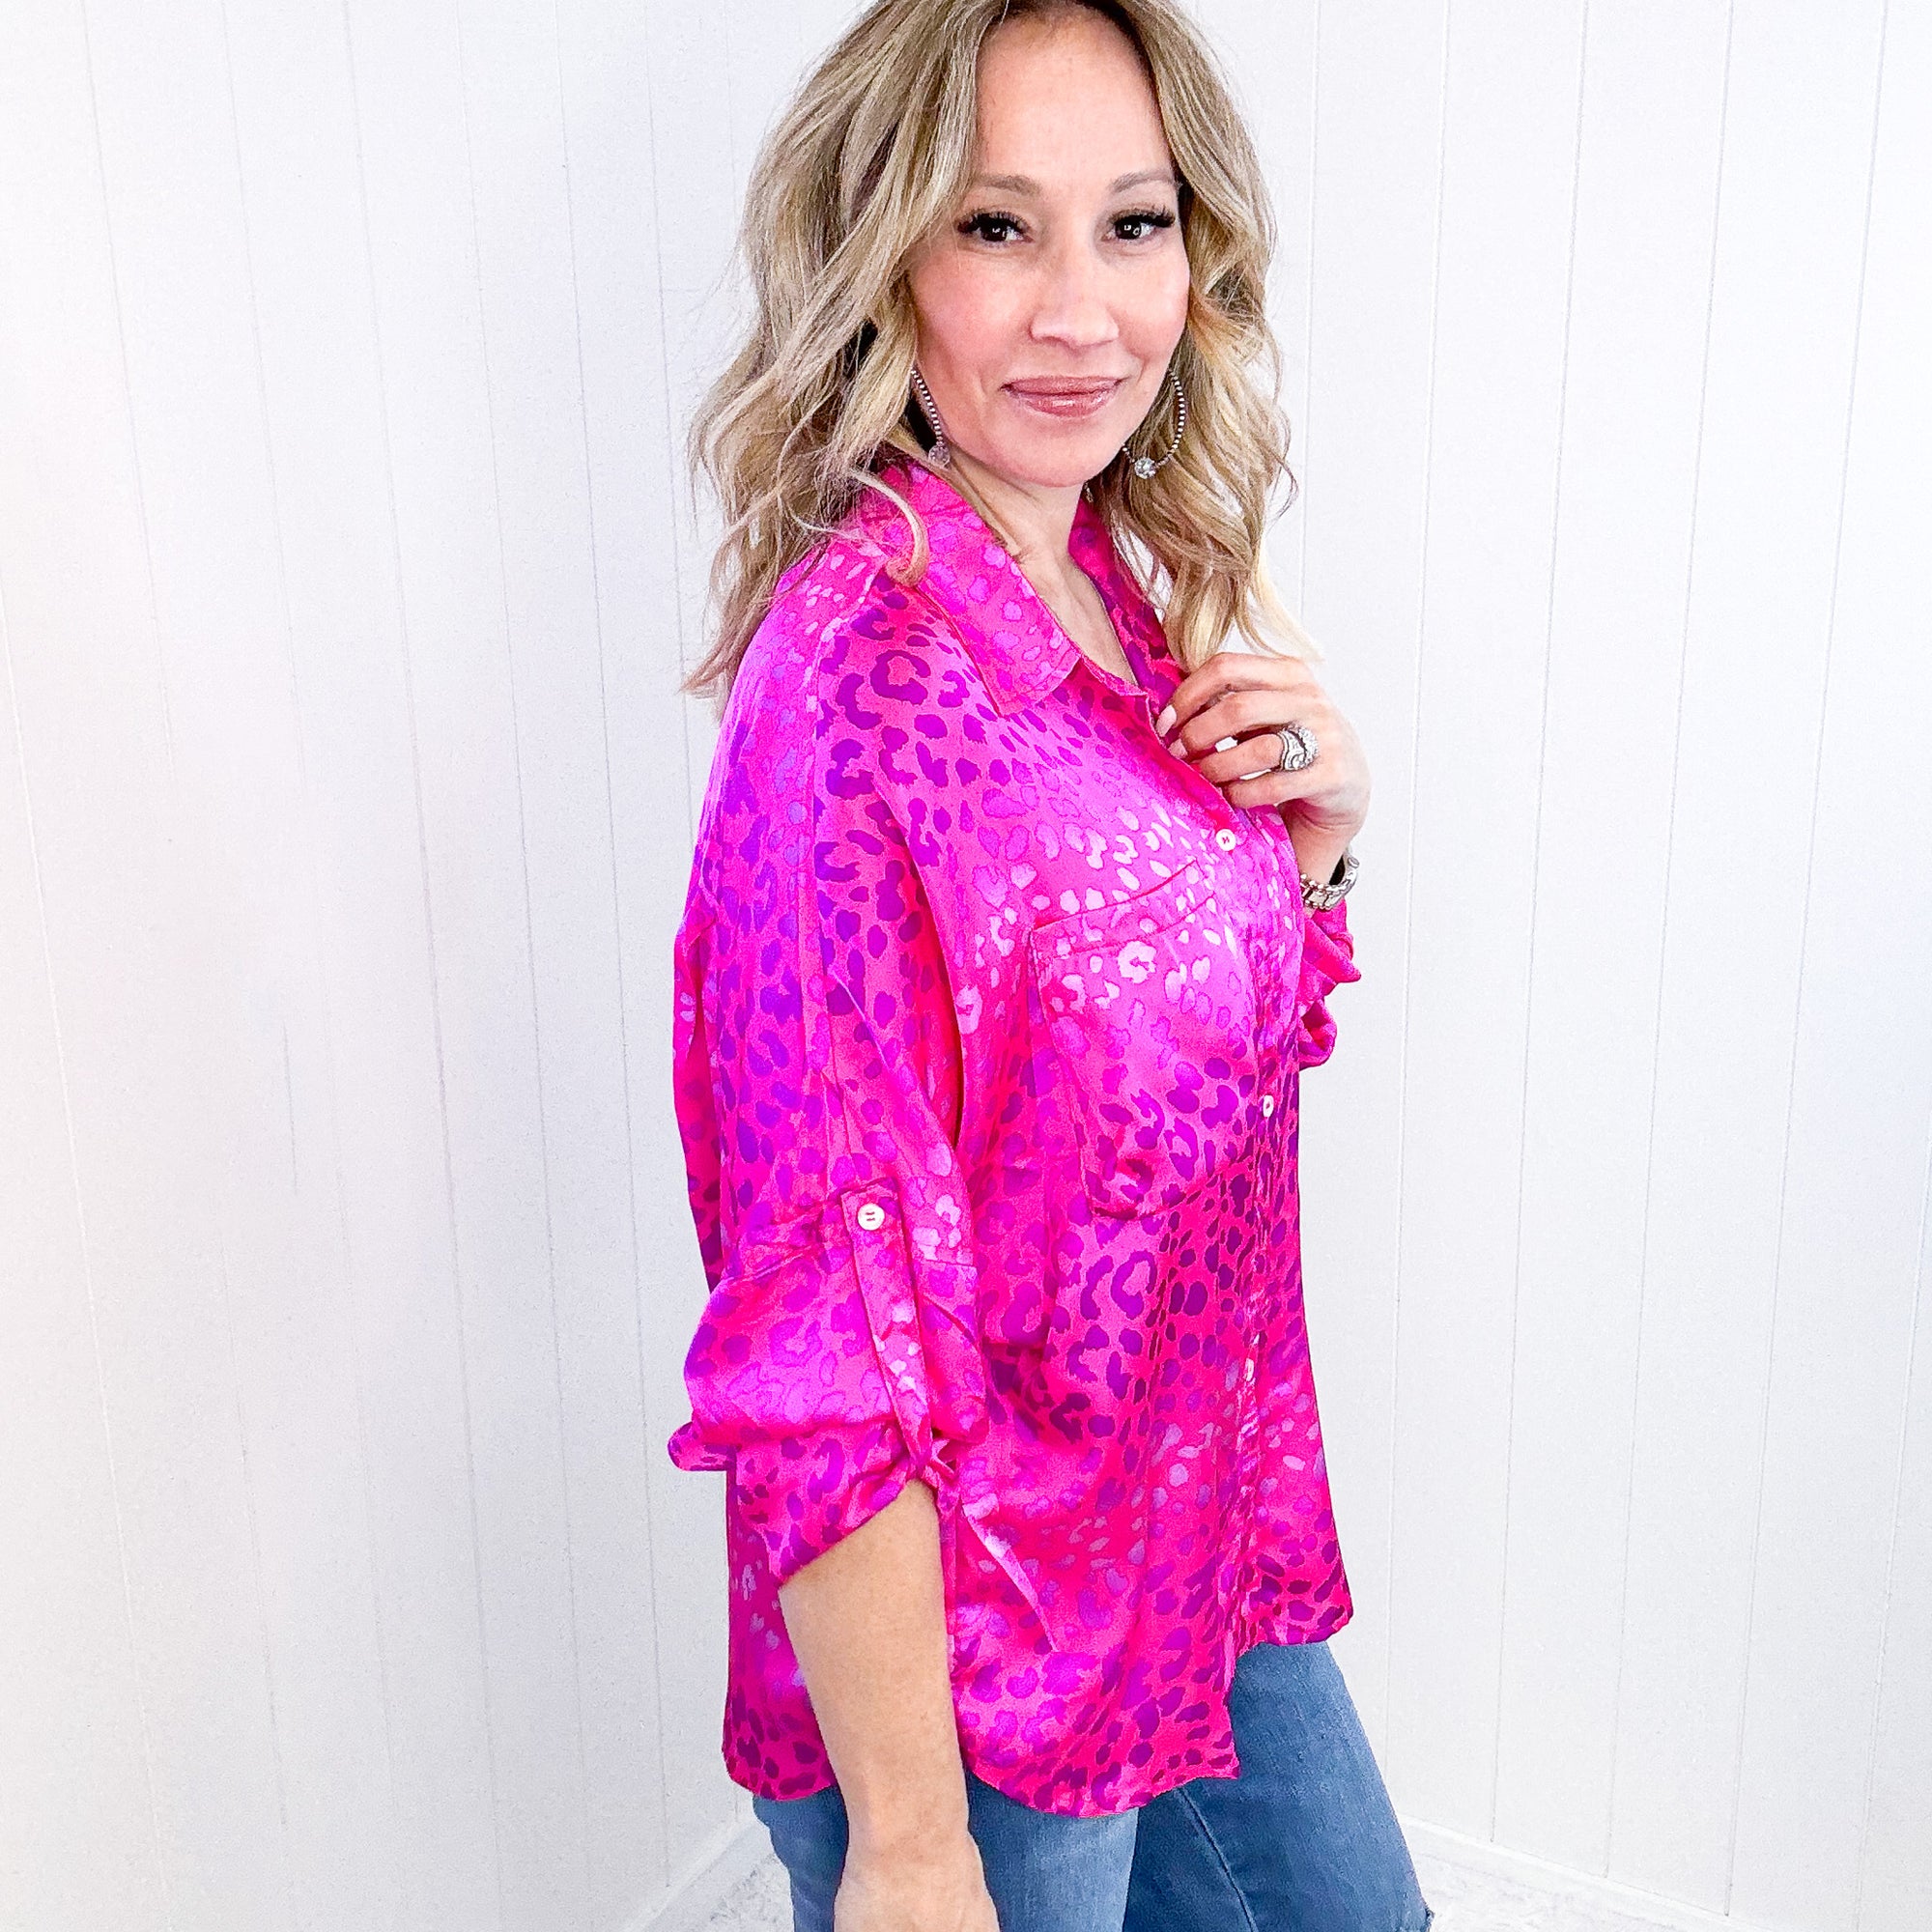 Metallic Pink Wild Print at Two Button Up Blouse - Boujee Boutique 